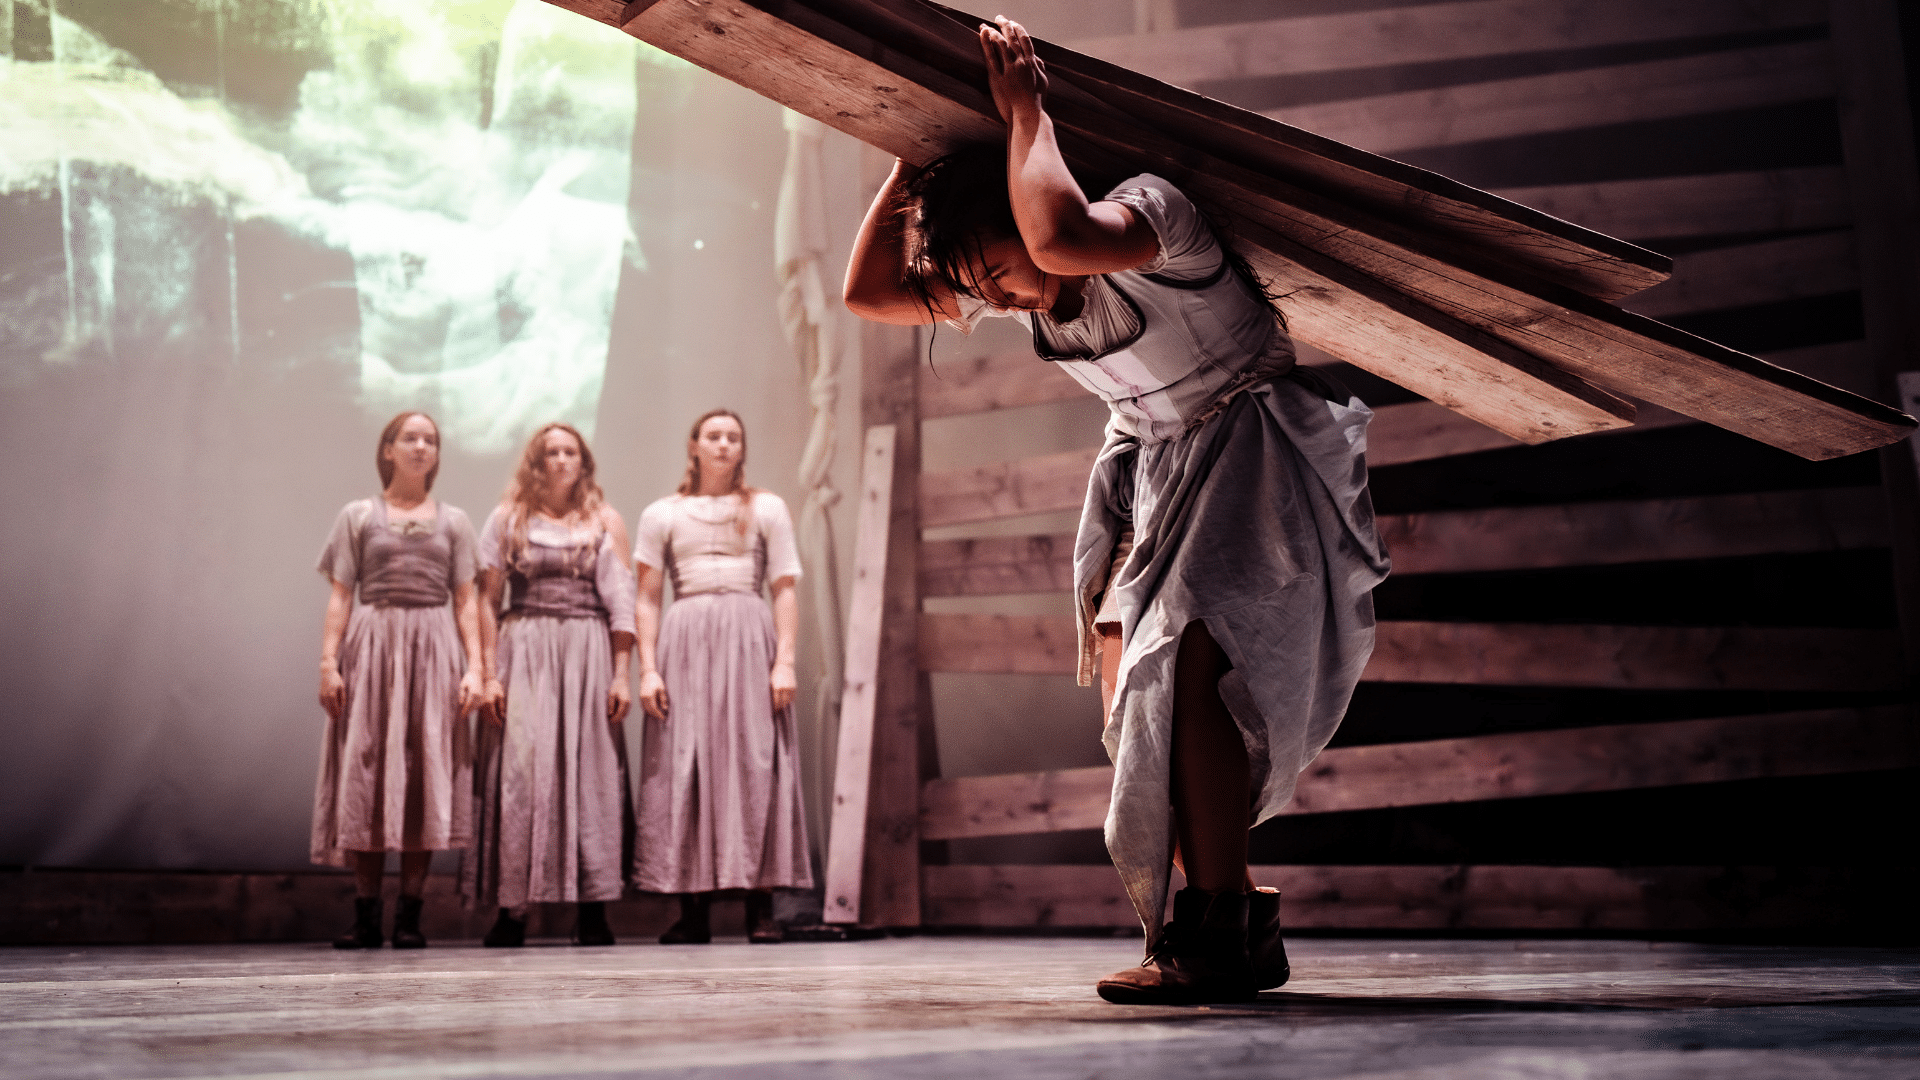 Tess production photo: a performer in a full-skirted, pale linen dress struggles to carry 4 huge planks of wood on her shoulders; in the background, three other woman, similarly dressed, look on.